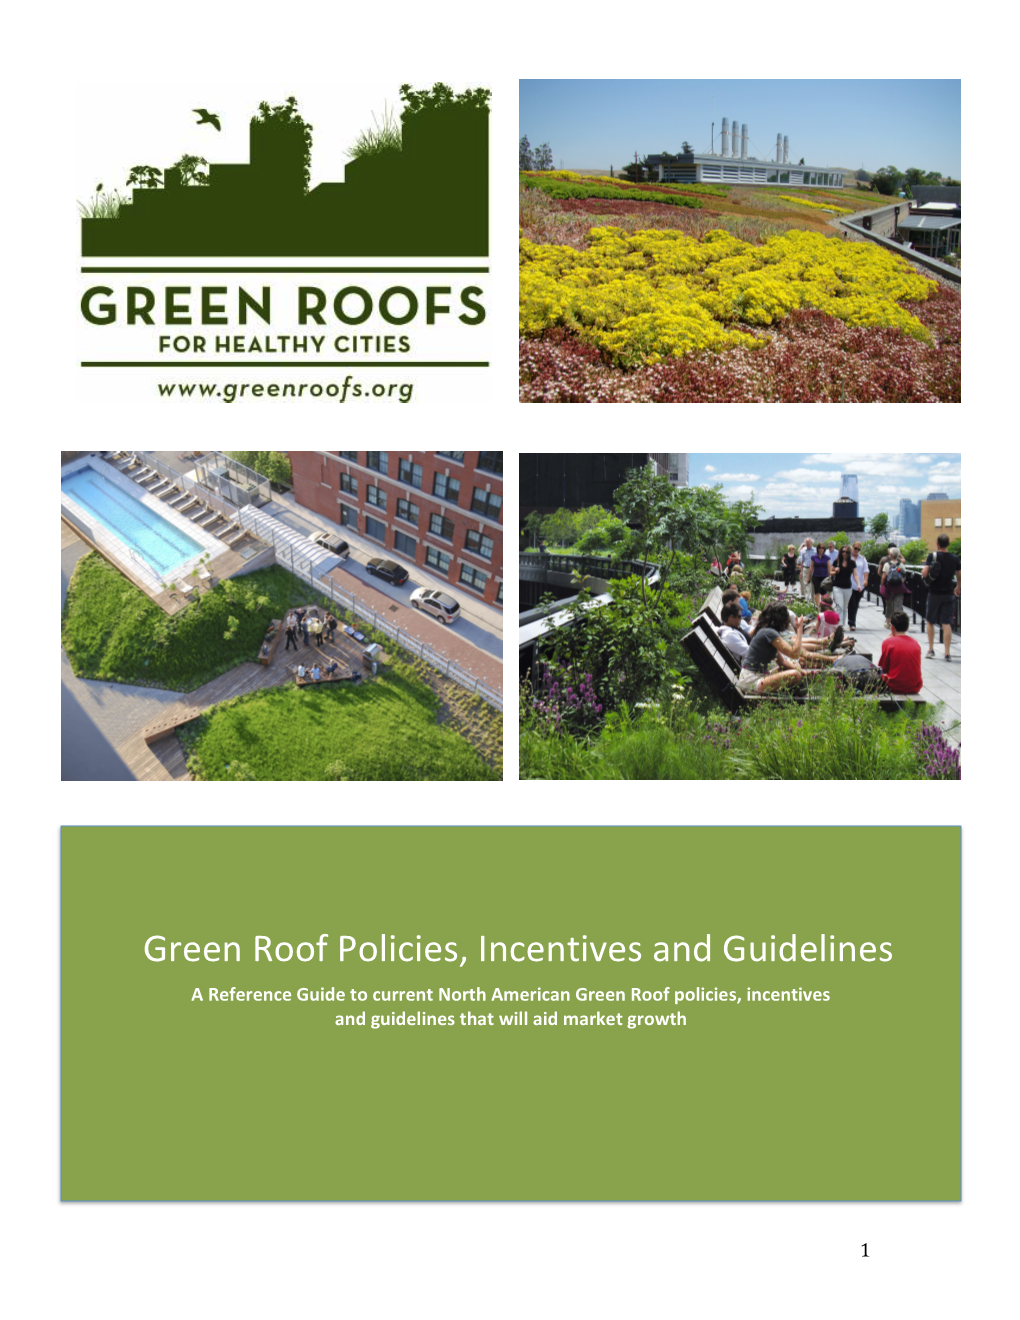 Green Roof Policies, Incentives and Guidelines a Reference Guide to Current North American Green Roof Policies, Incentives and Guidelines That Will Aid Market Growth